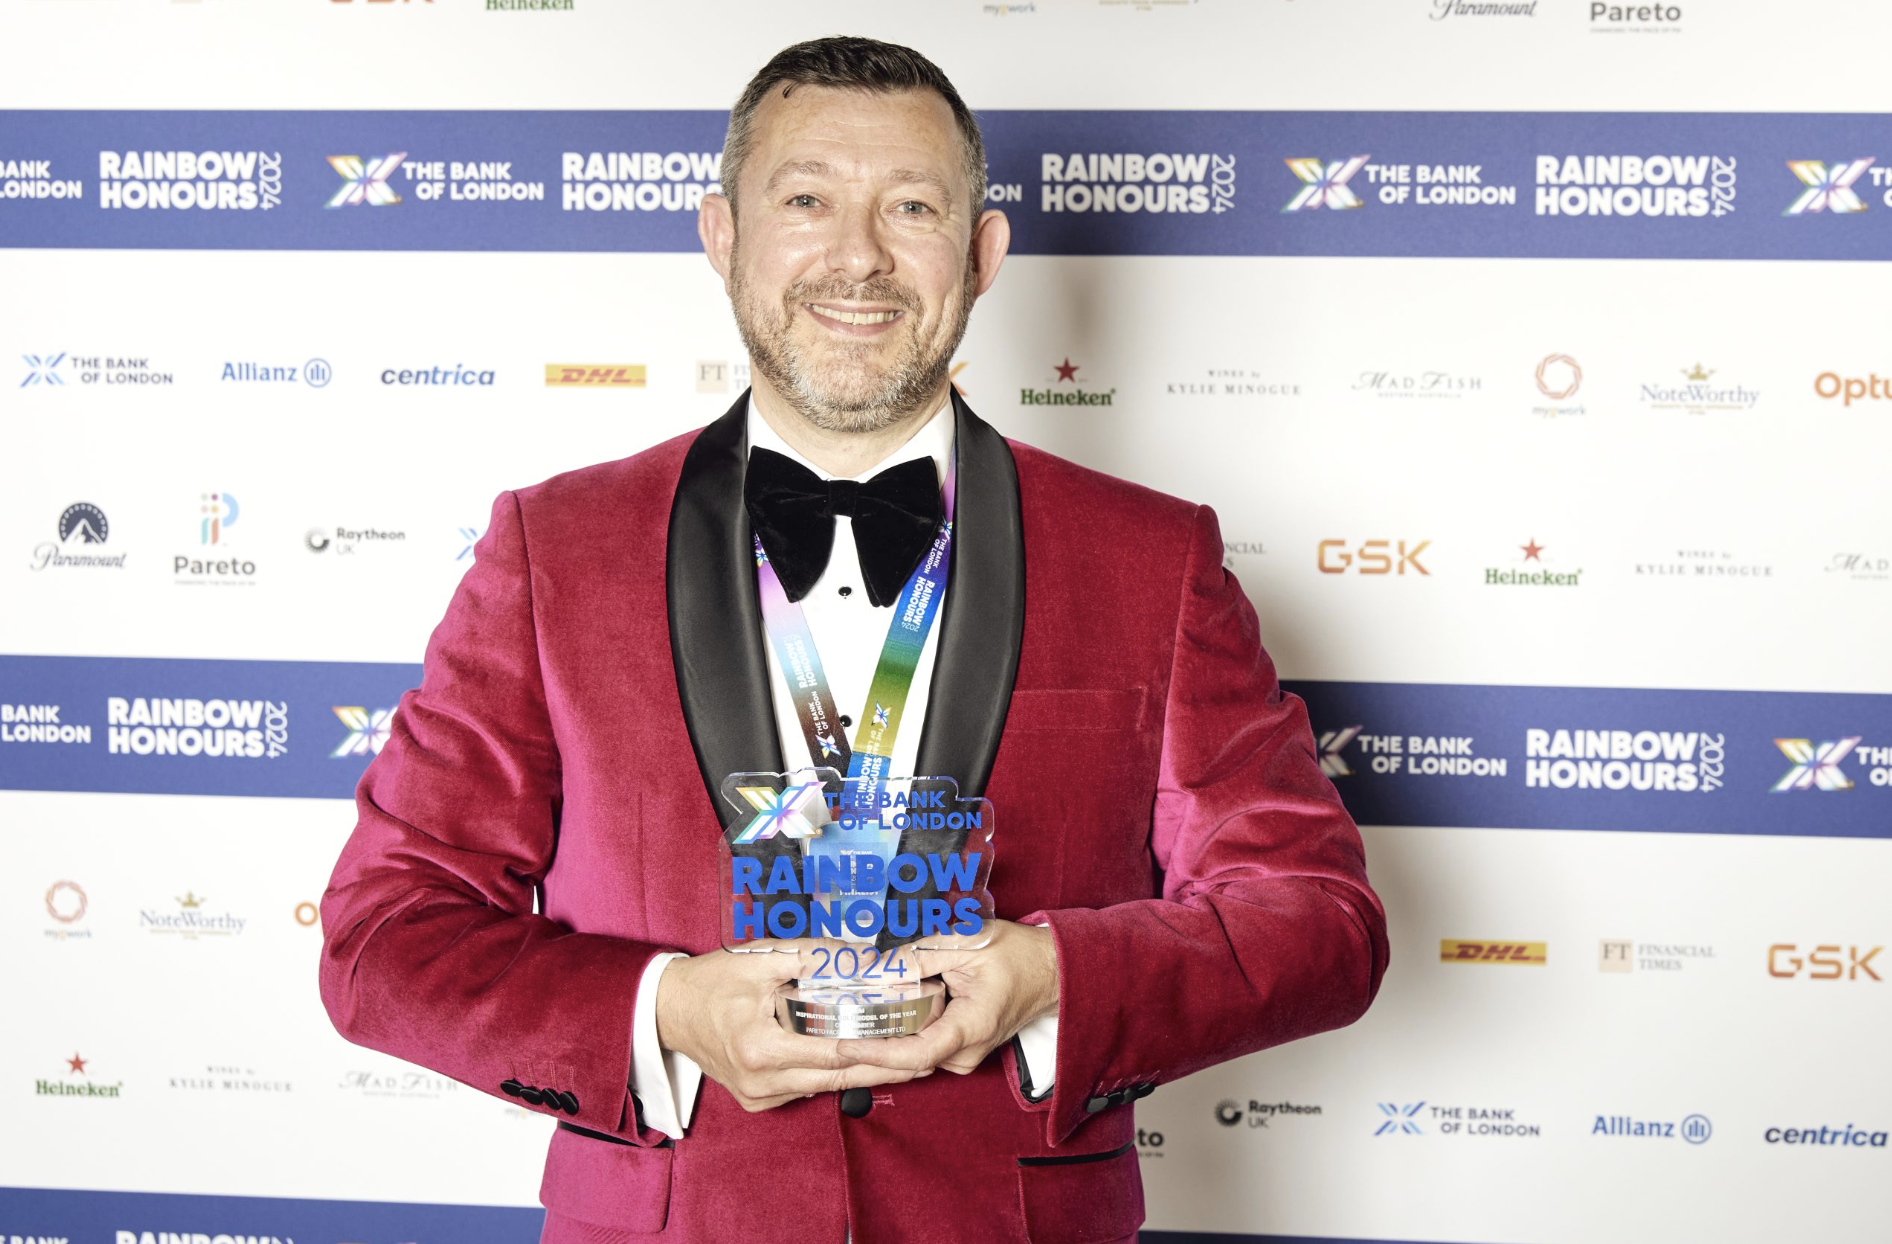 Pareto’s Colin Kimber Wins Role Model Of The Year at The Bank of London Rainbow Honours